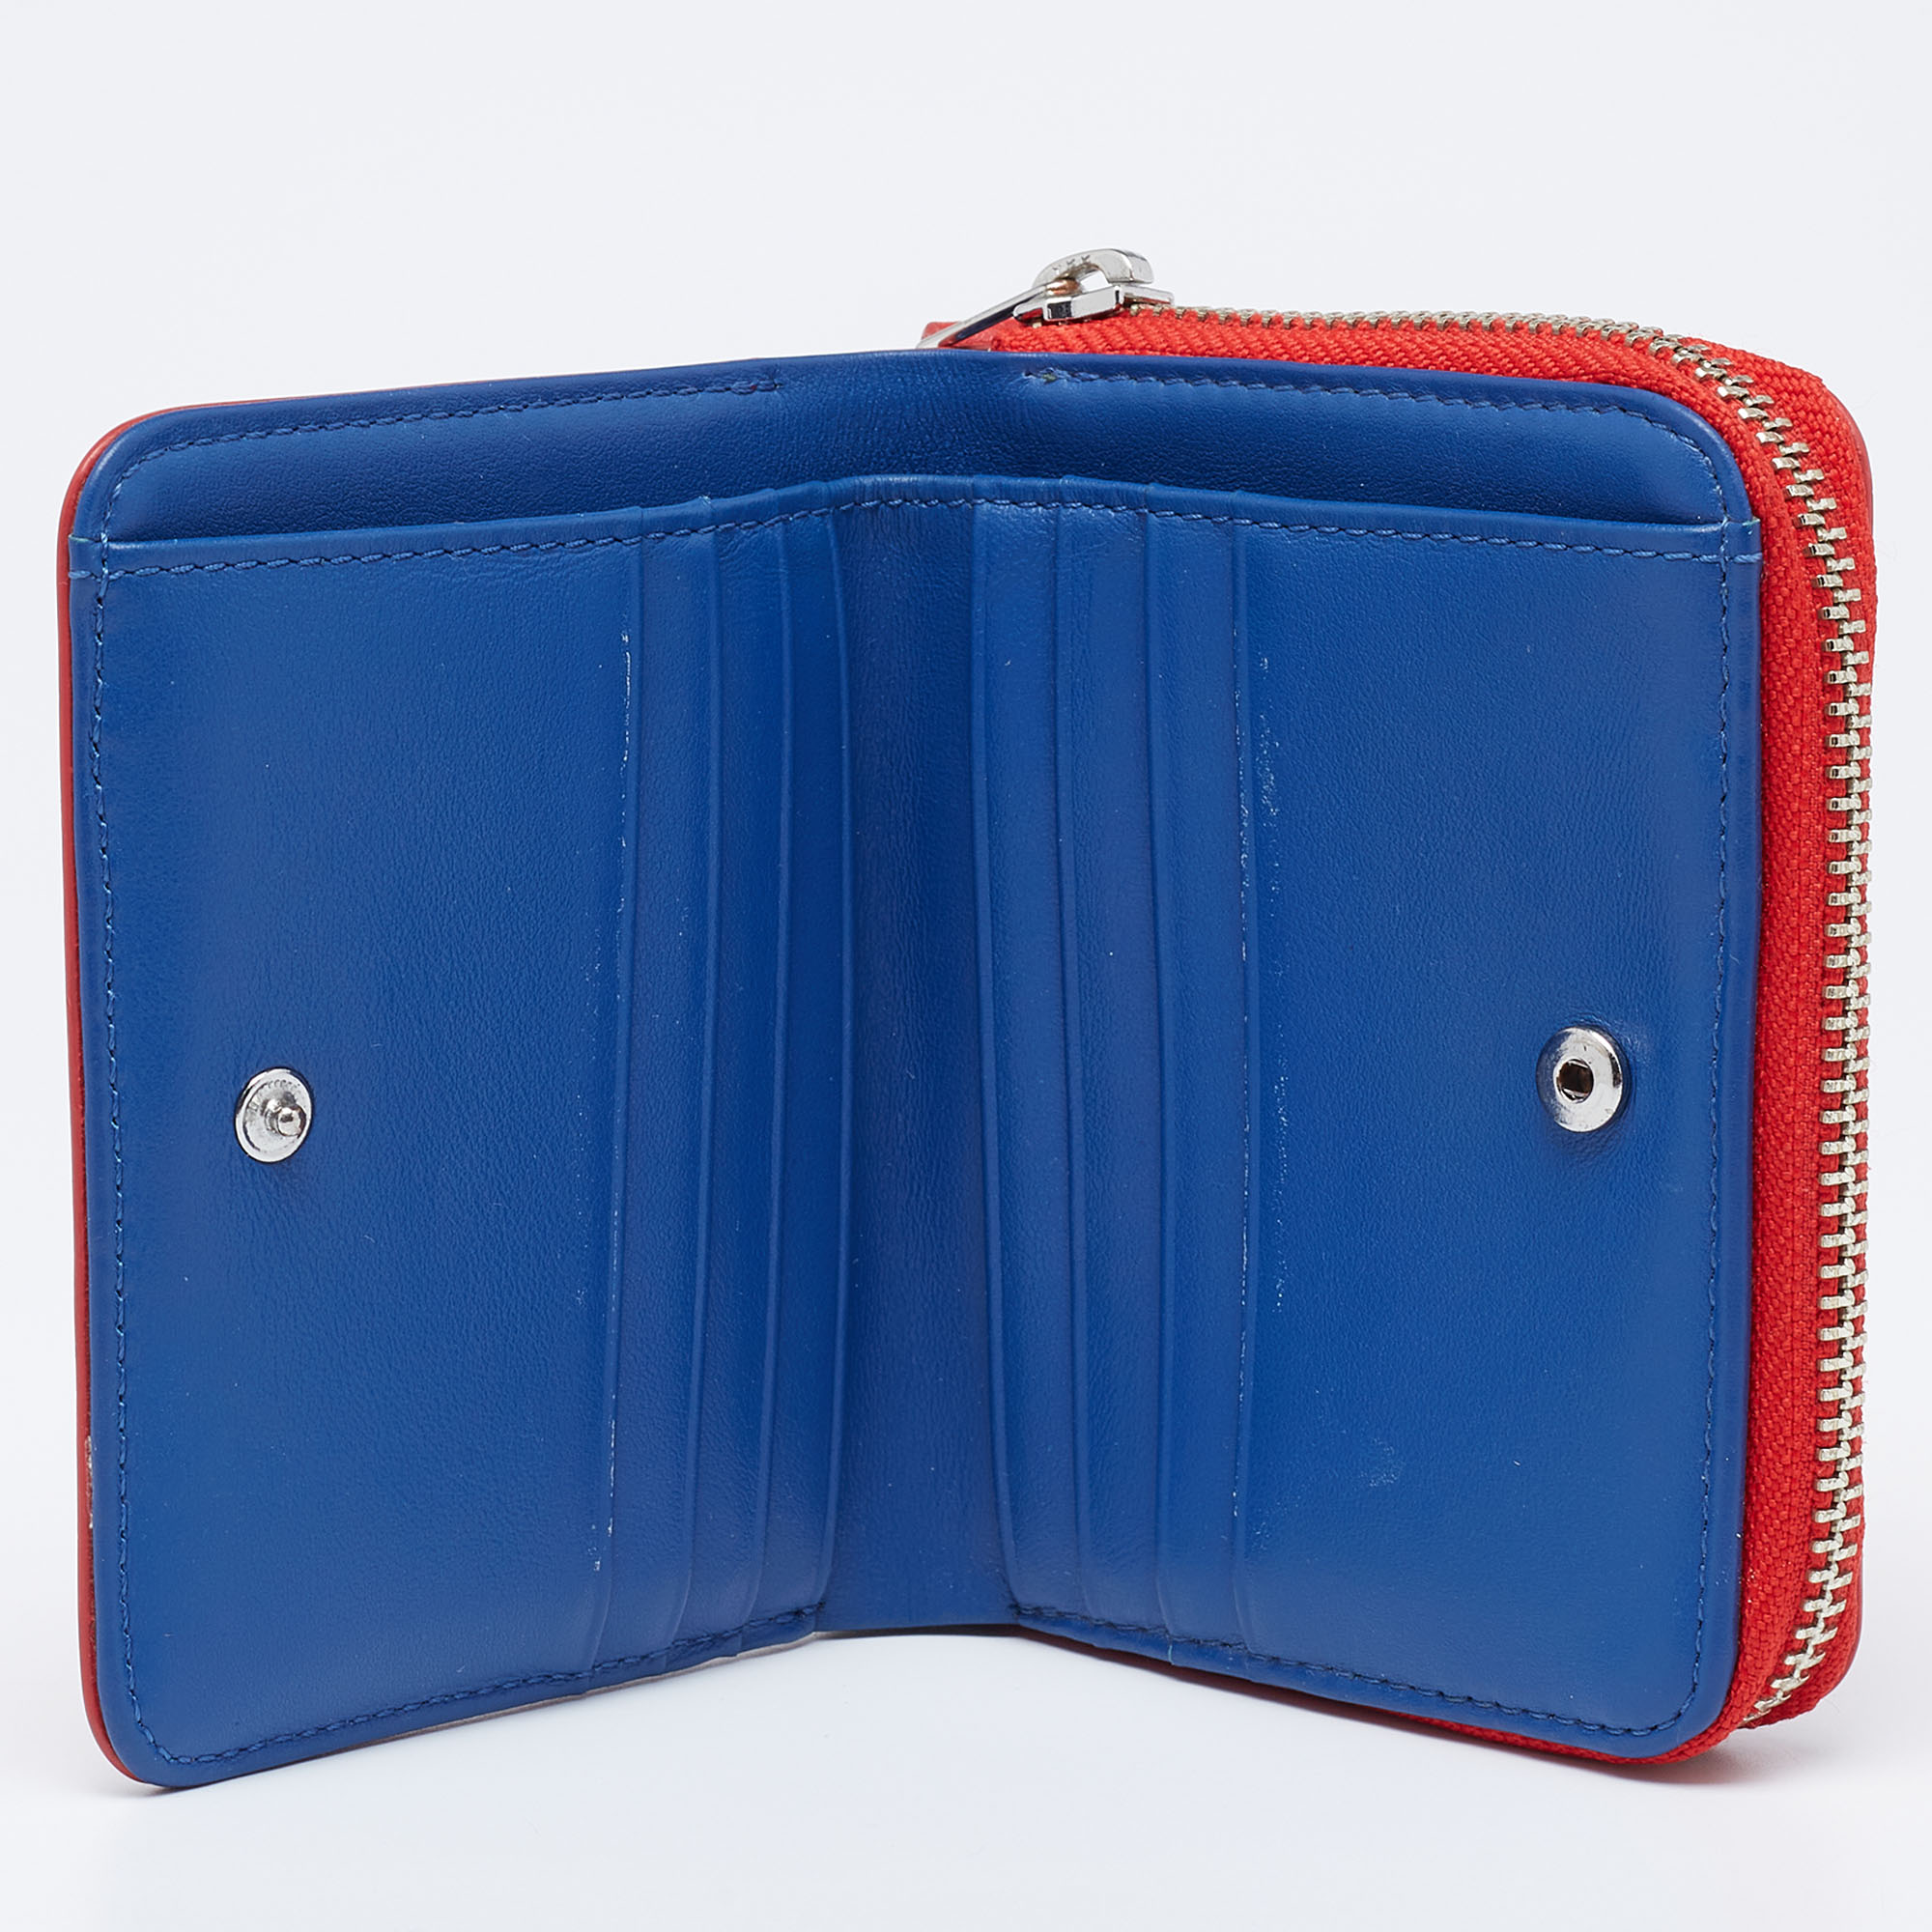 

Kenzo Red/Blue Leather K Zip Compact Wallet